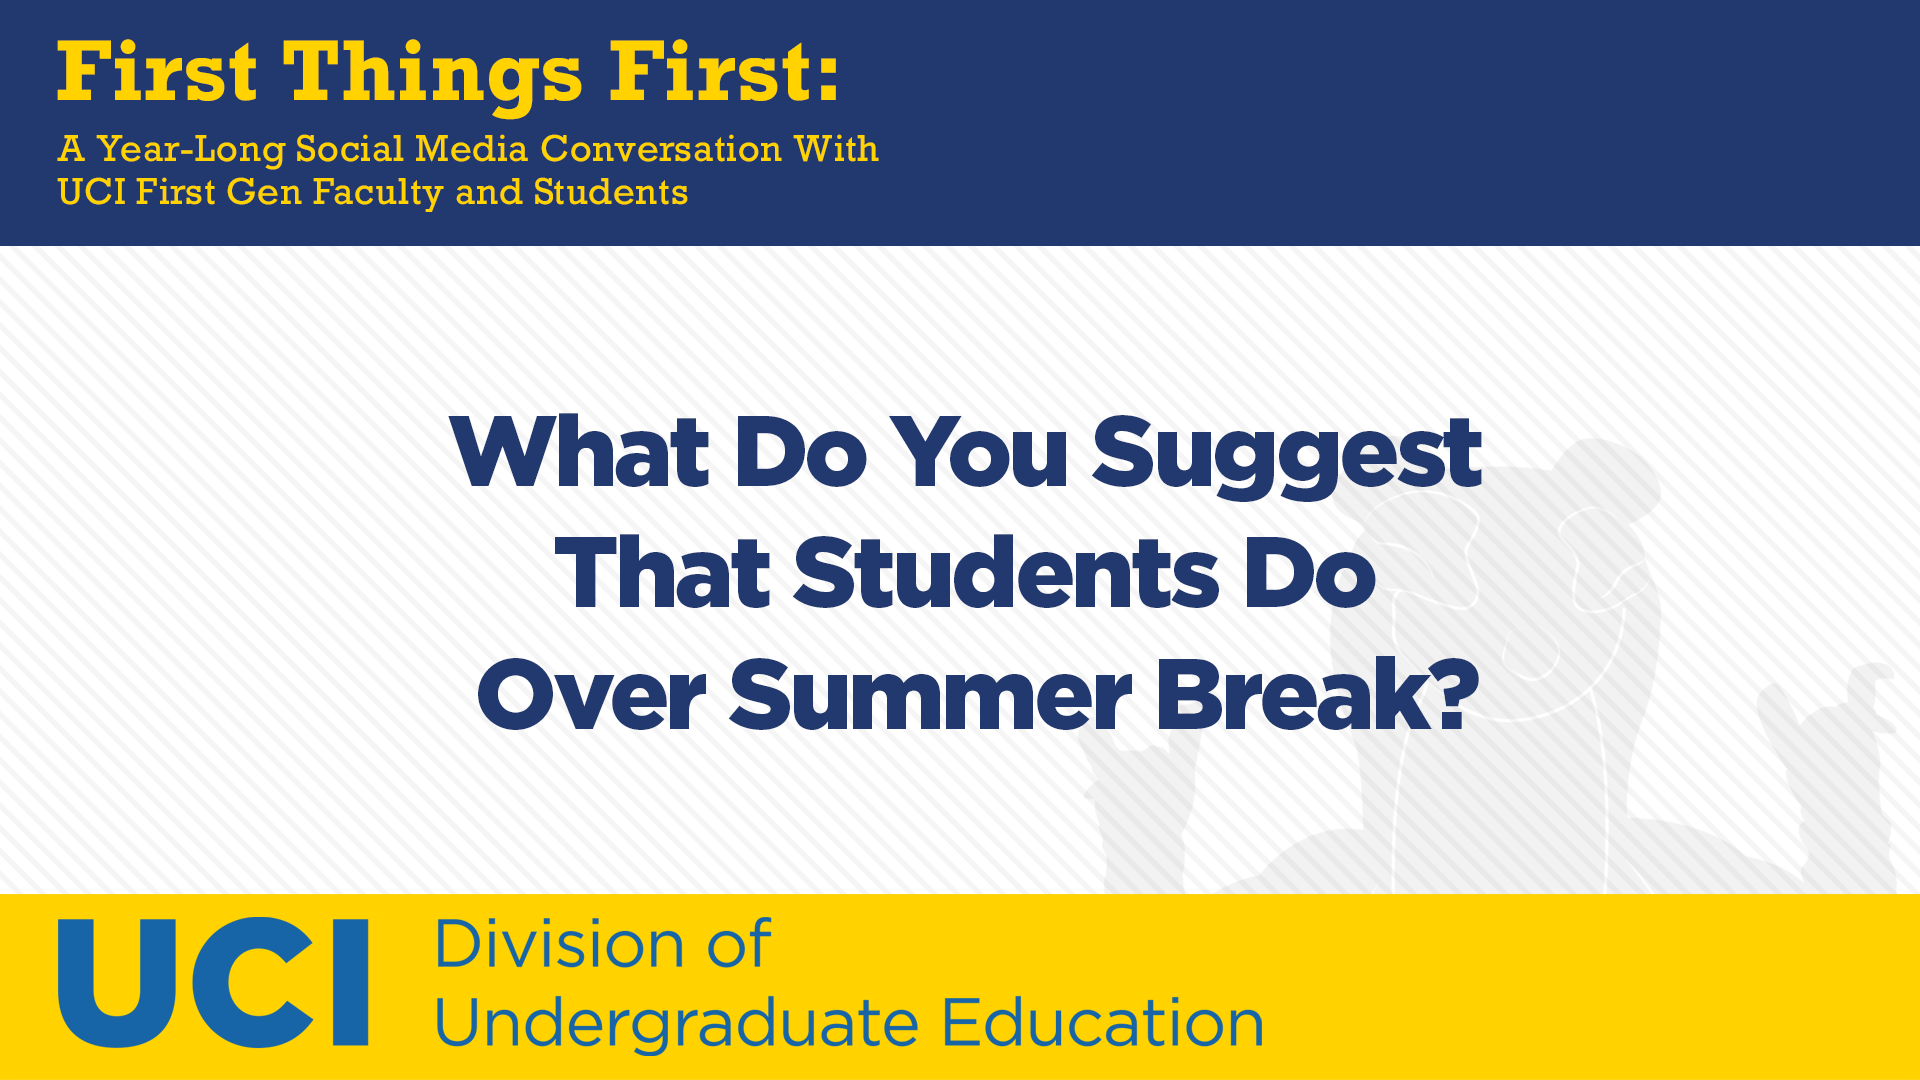 What Do You Suggest That Students Do Over Summer Break?